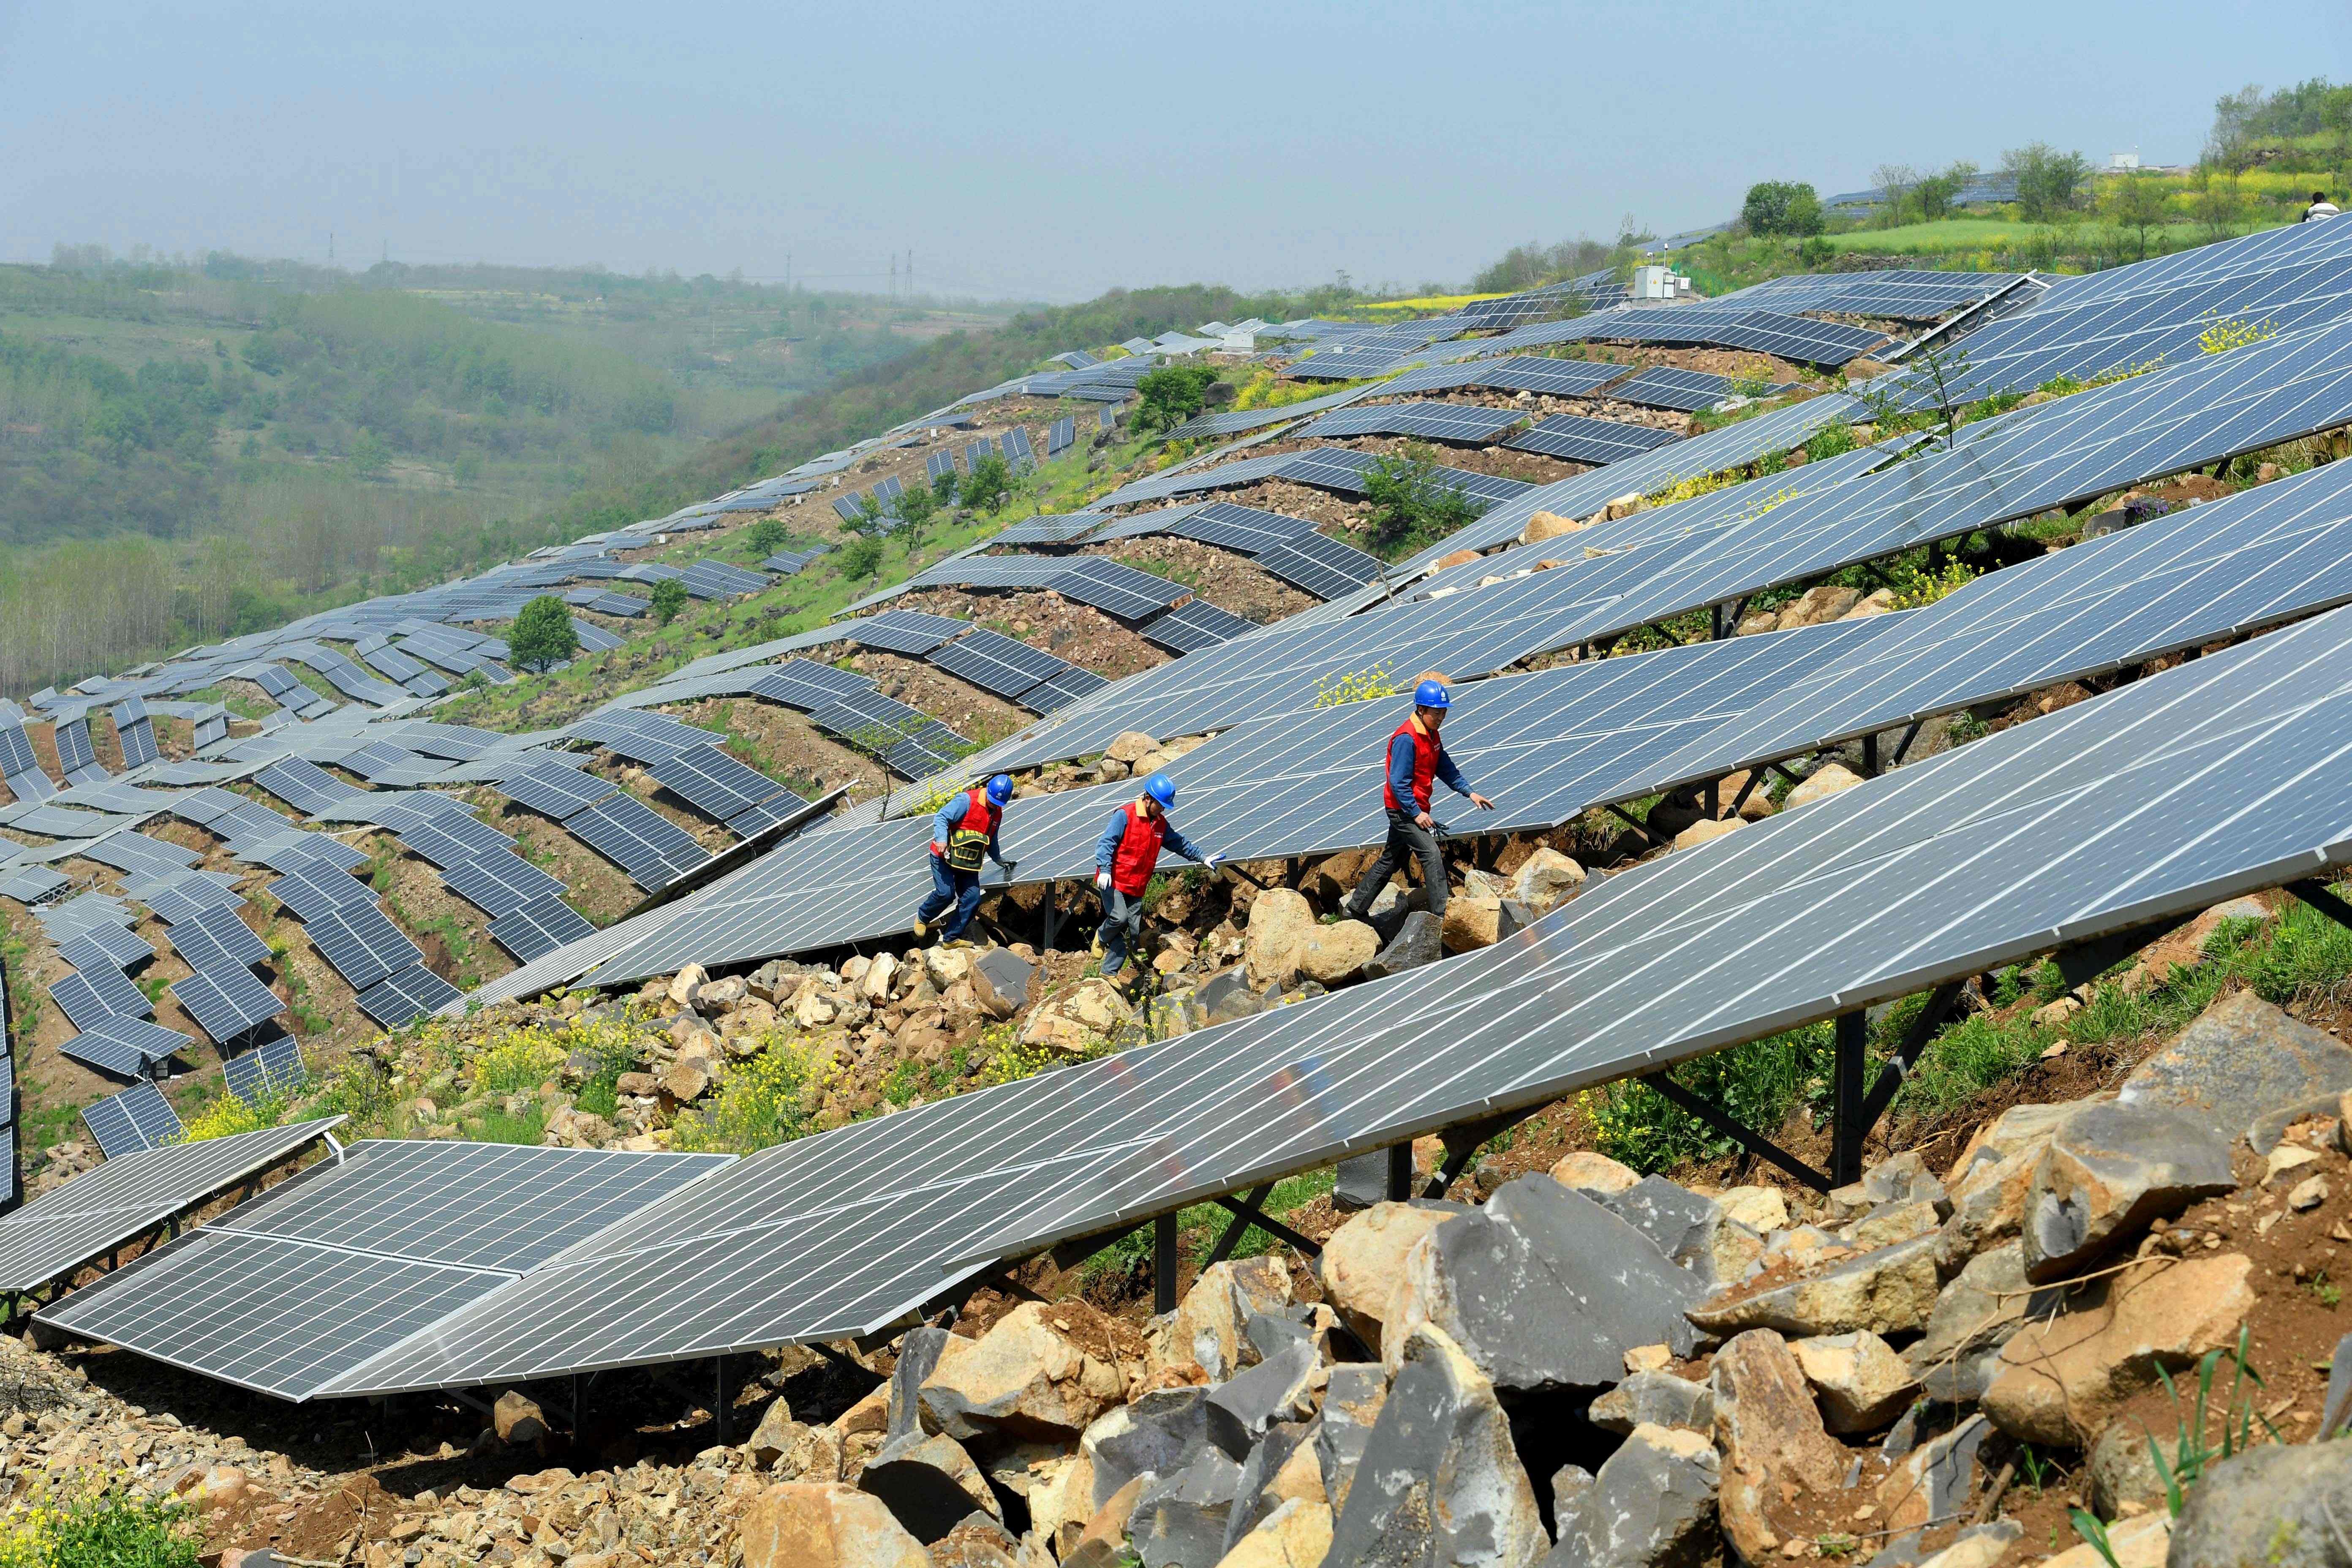 Chinese workers check solar panels last month on a hillside in a village in Chuzhou, Anhui province. China is now home to the world’s fastest-growing renewable energy industry. Photo: AFP